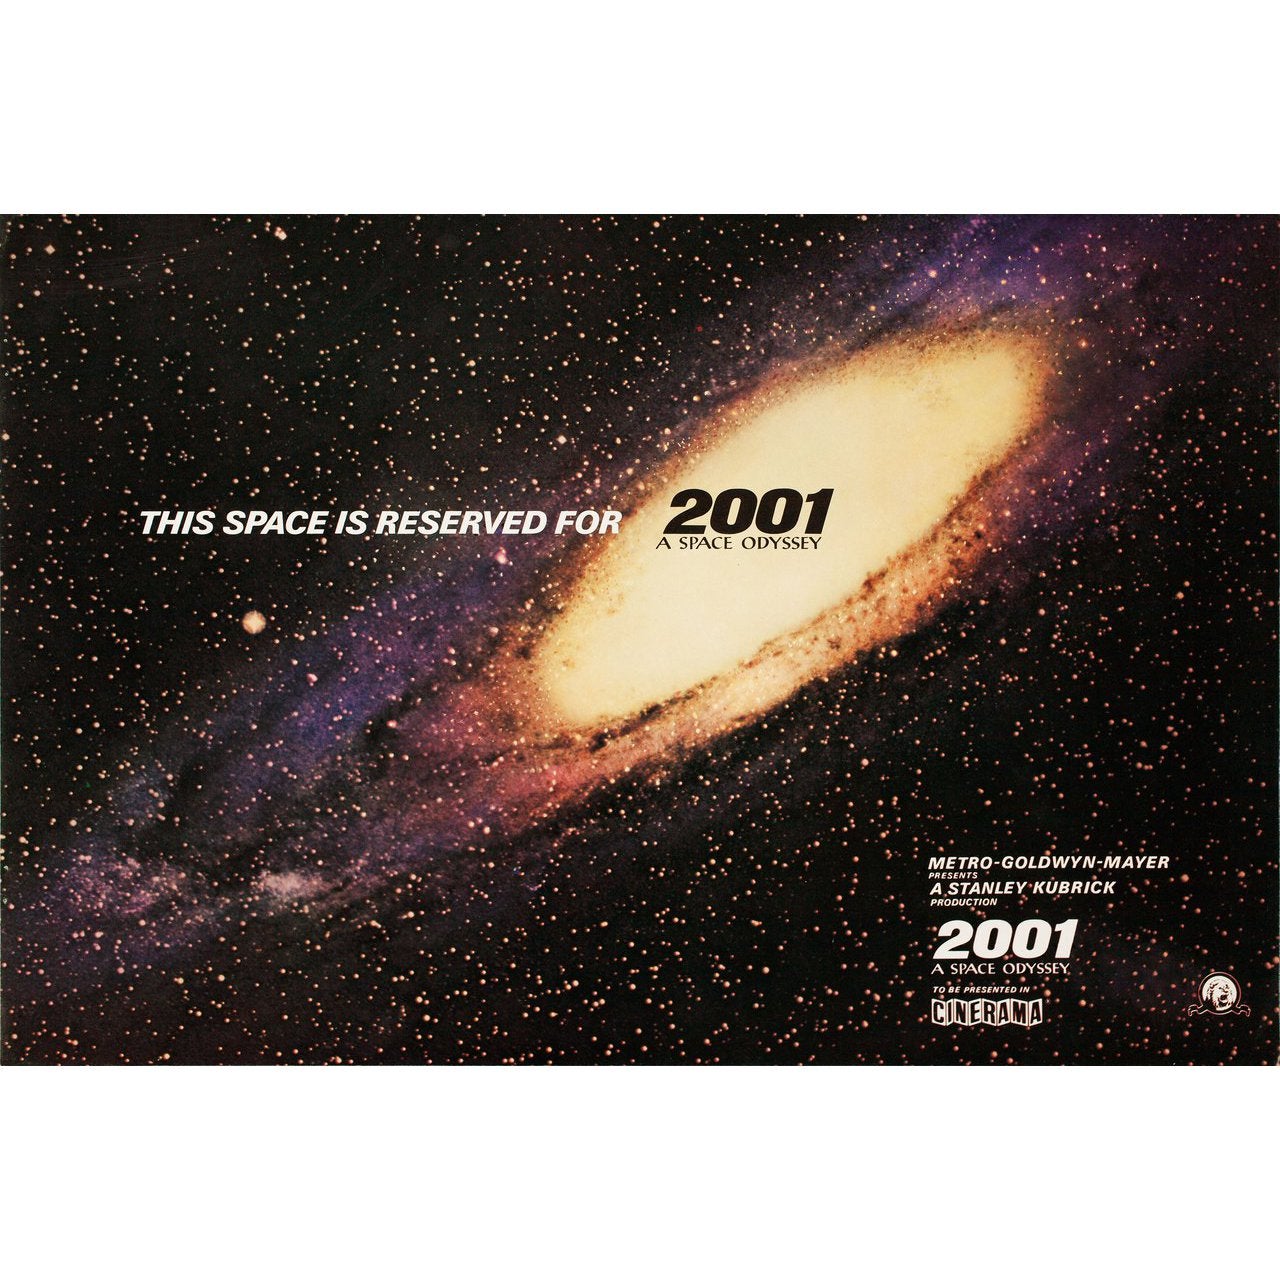 2001: A Space Odyssey 1968 U.S. Mini Film Poster For Sale